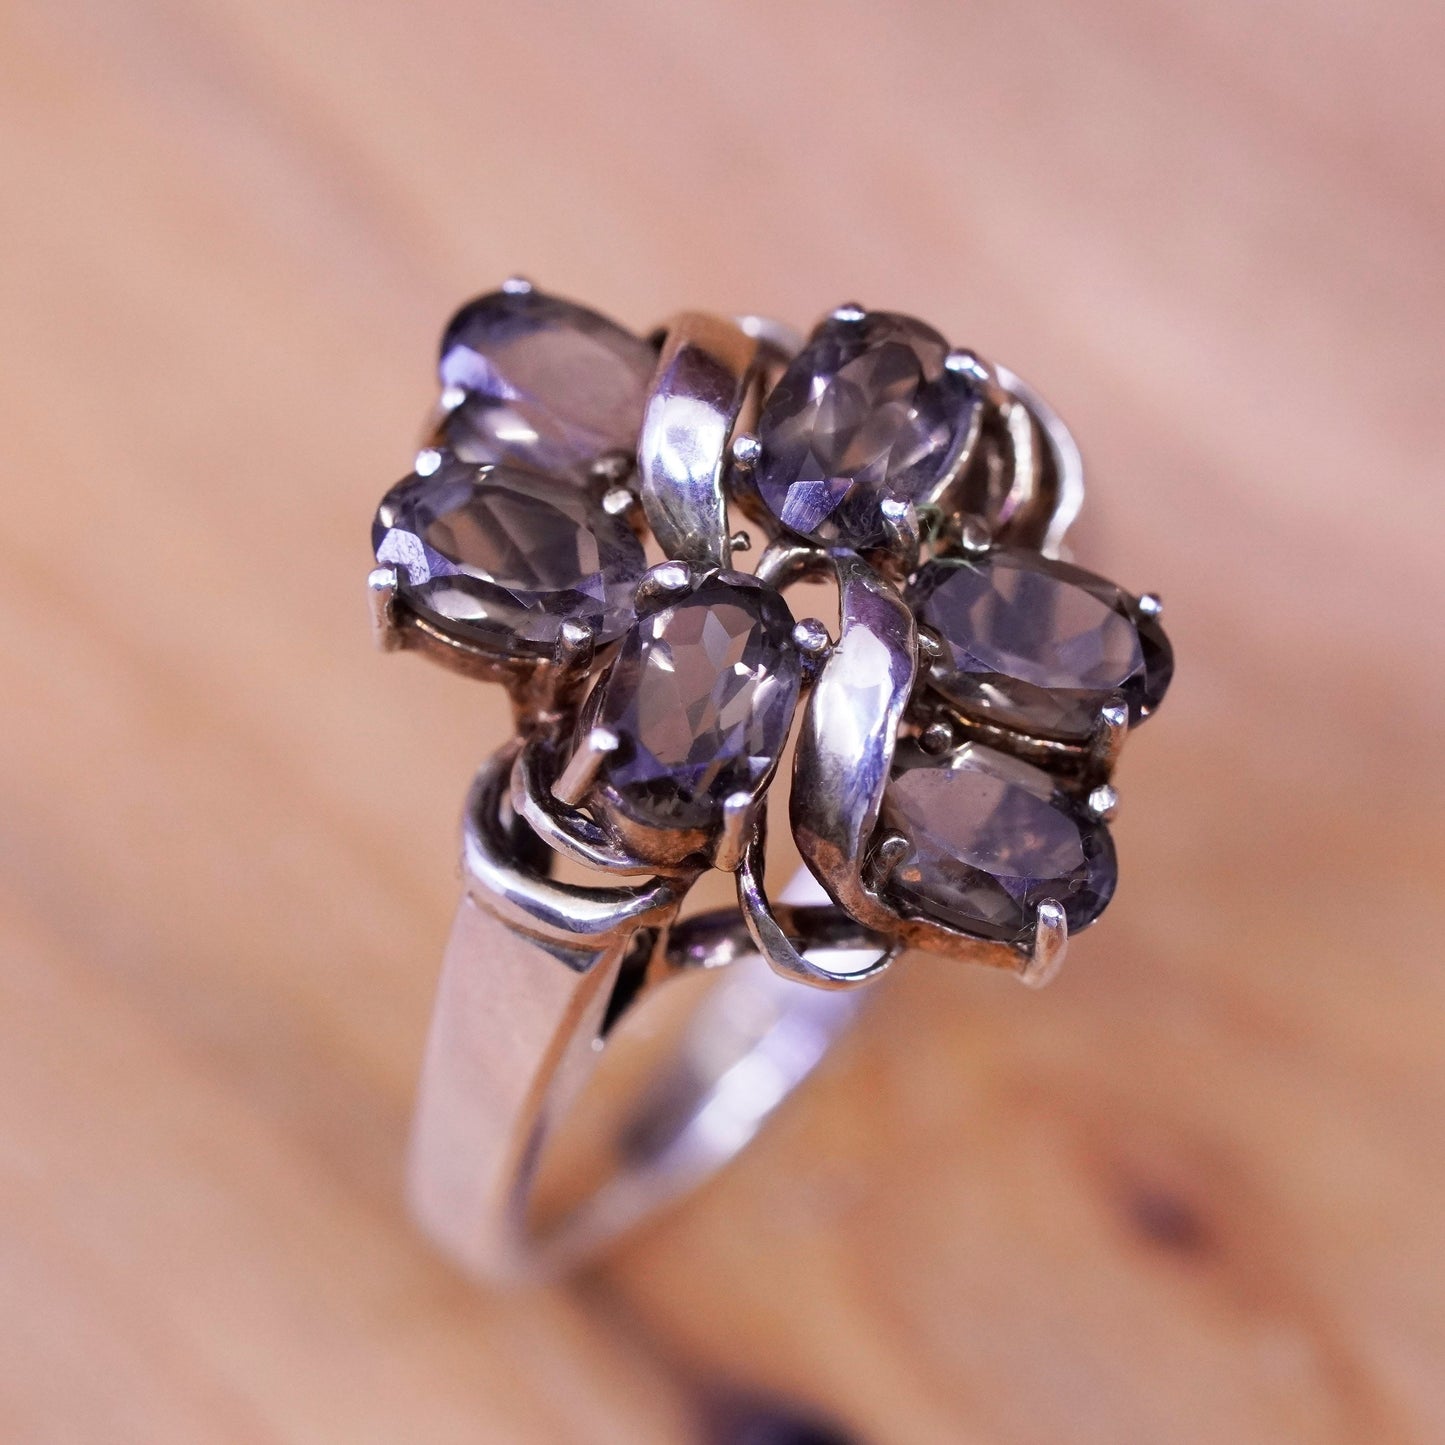 Size 8, vintage Sterling 925 silver floral ring with smoky crystal